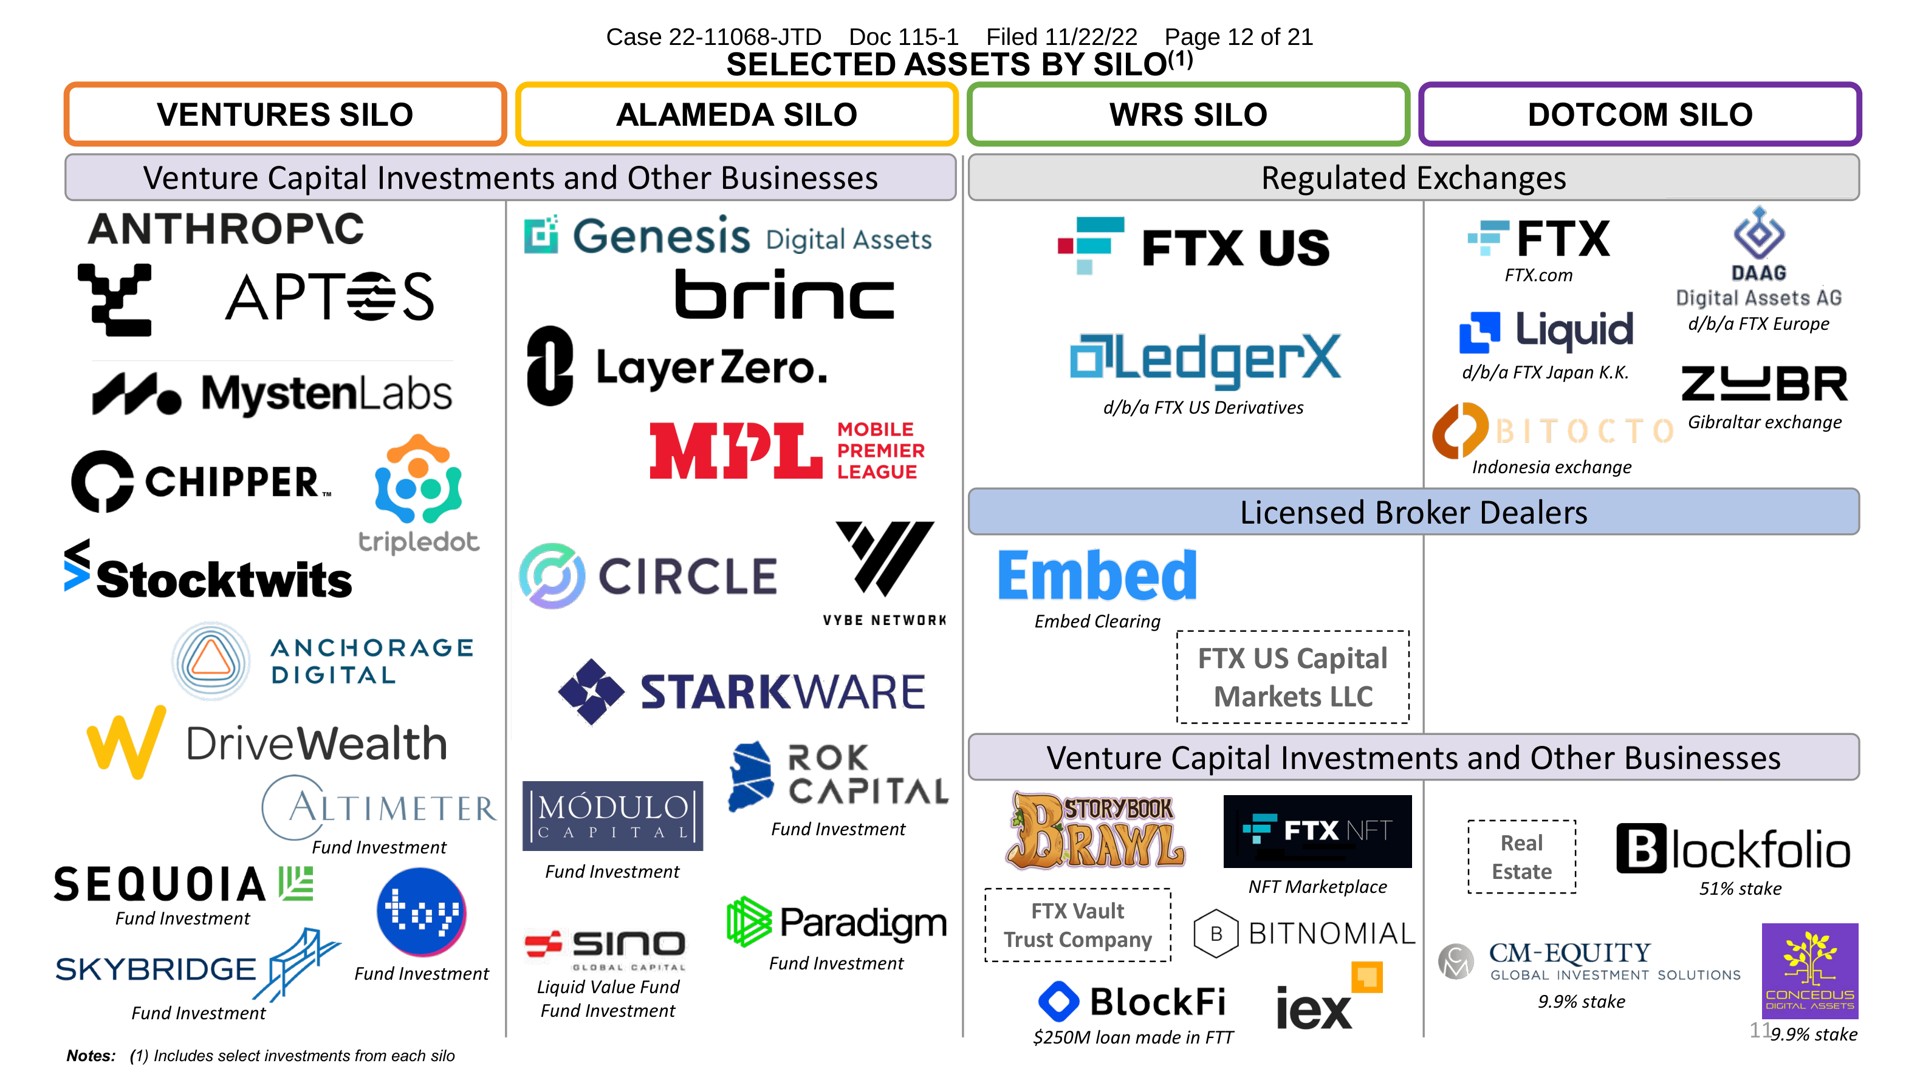 selected assets by silo ventures silo alameda silo silo silo venture capital investments and other businesses regulated exchanges licensed broker dealers us capital markets venture capital investments and other businesses case doc filed page of chipper layer zero circle i liquid embed altimeter paradigm equity | FTX Trading